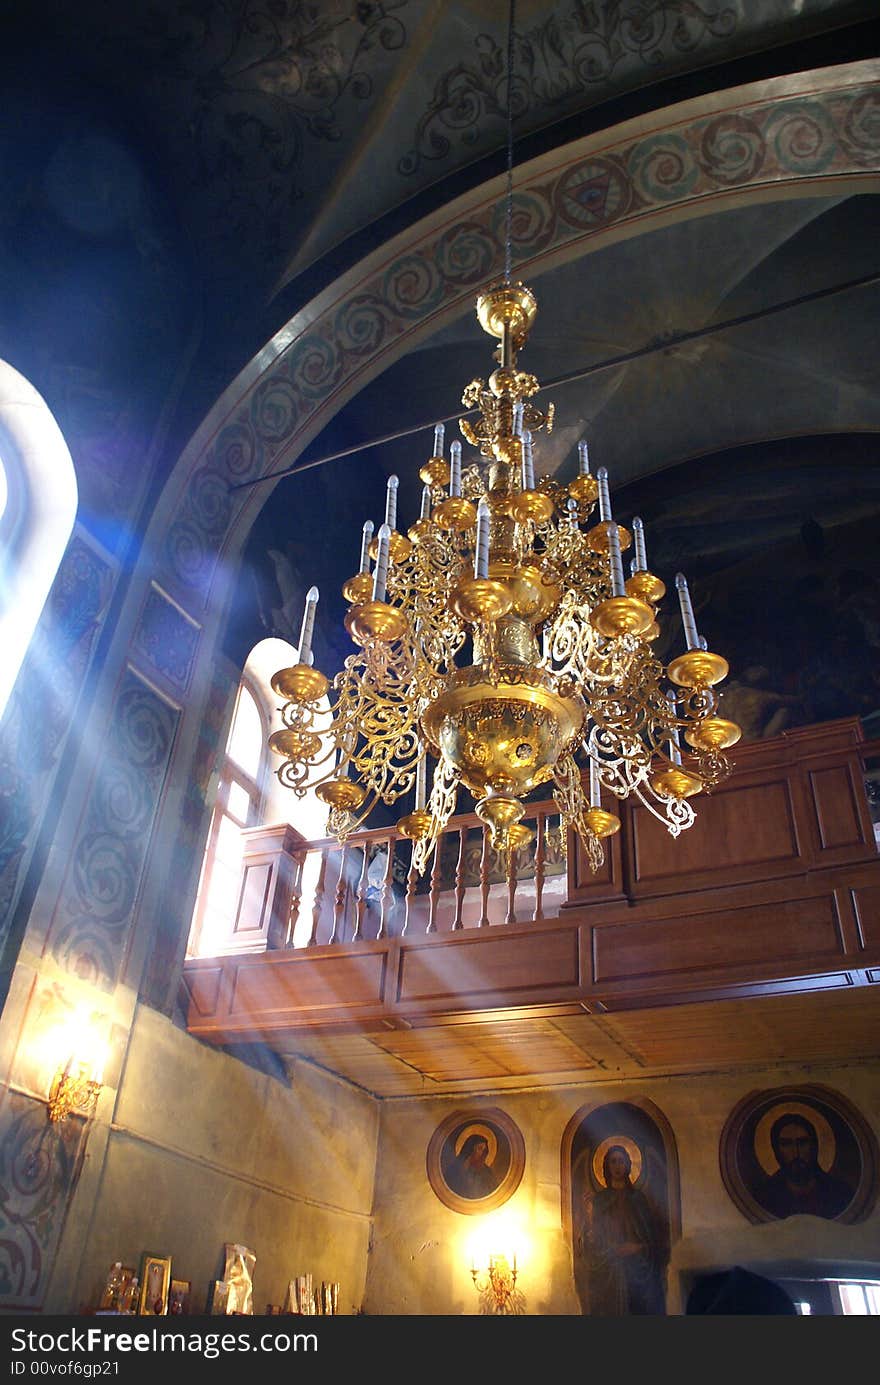 Old chandelier of a cathedral